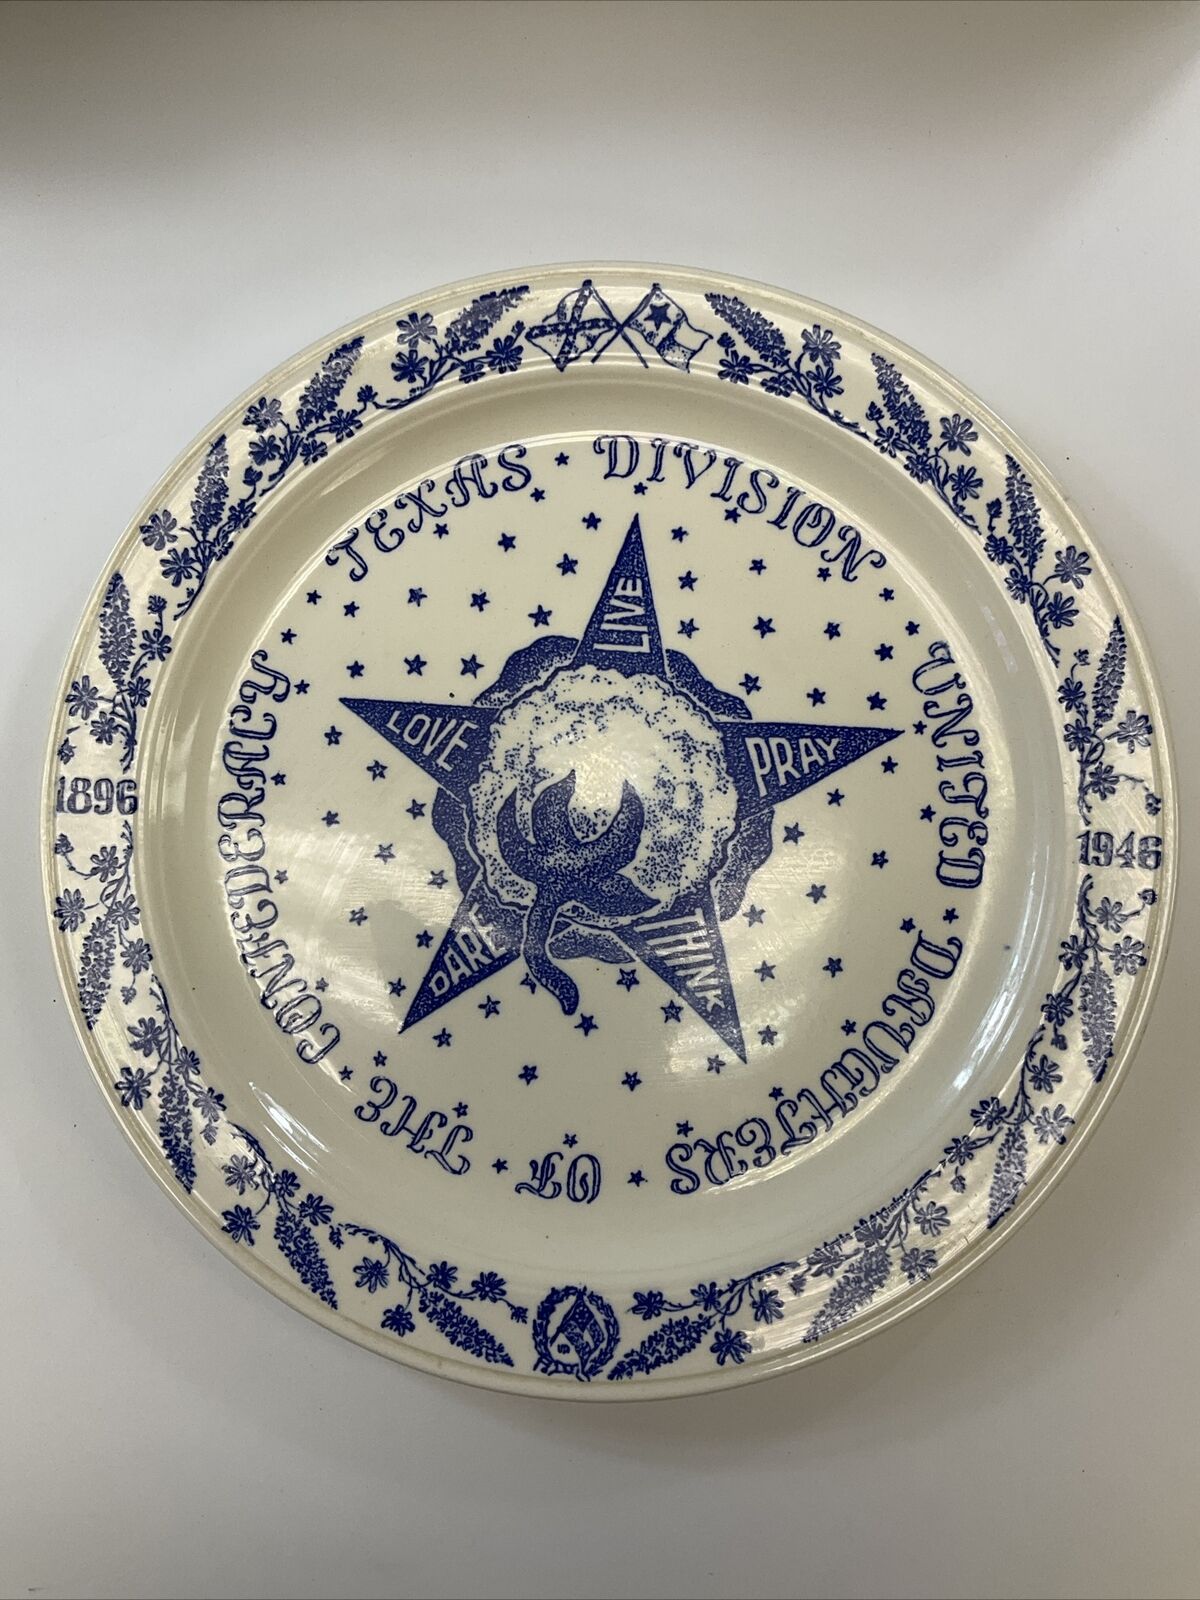 United Daughters of the Confederacy, Texas Division, 1946 plate